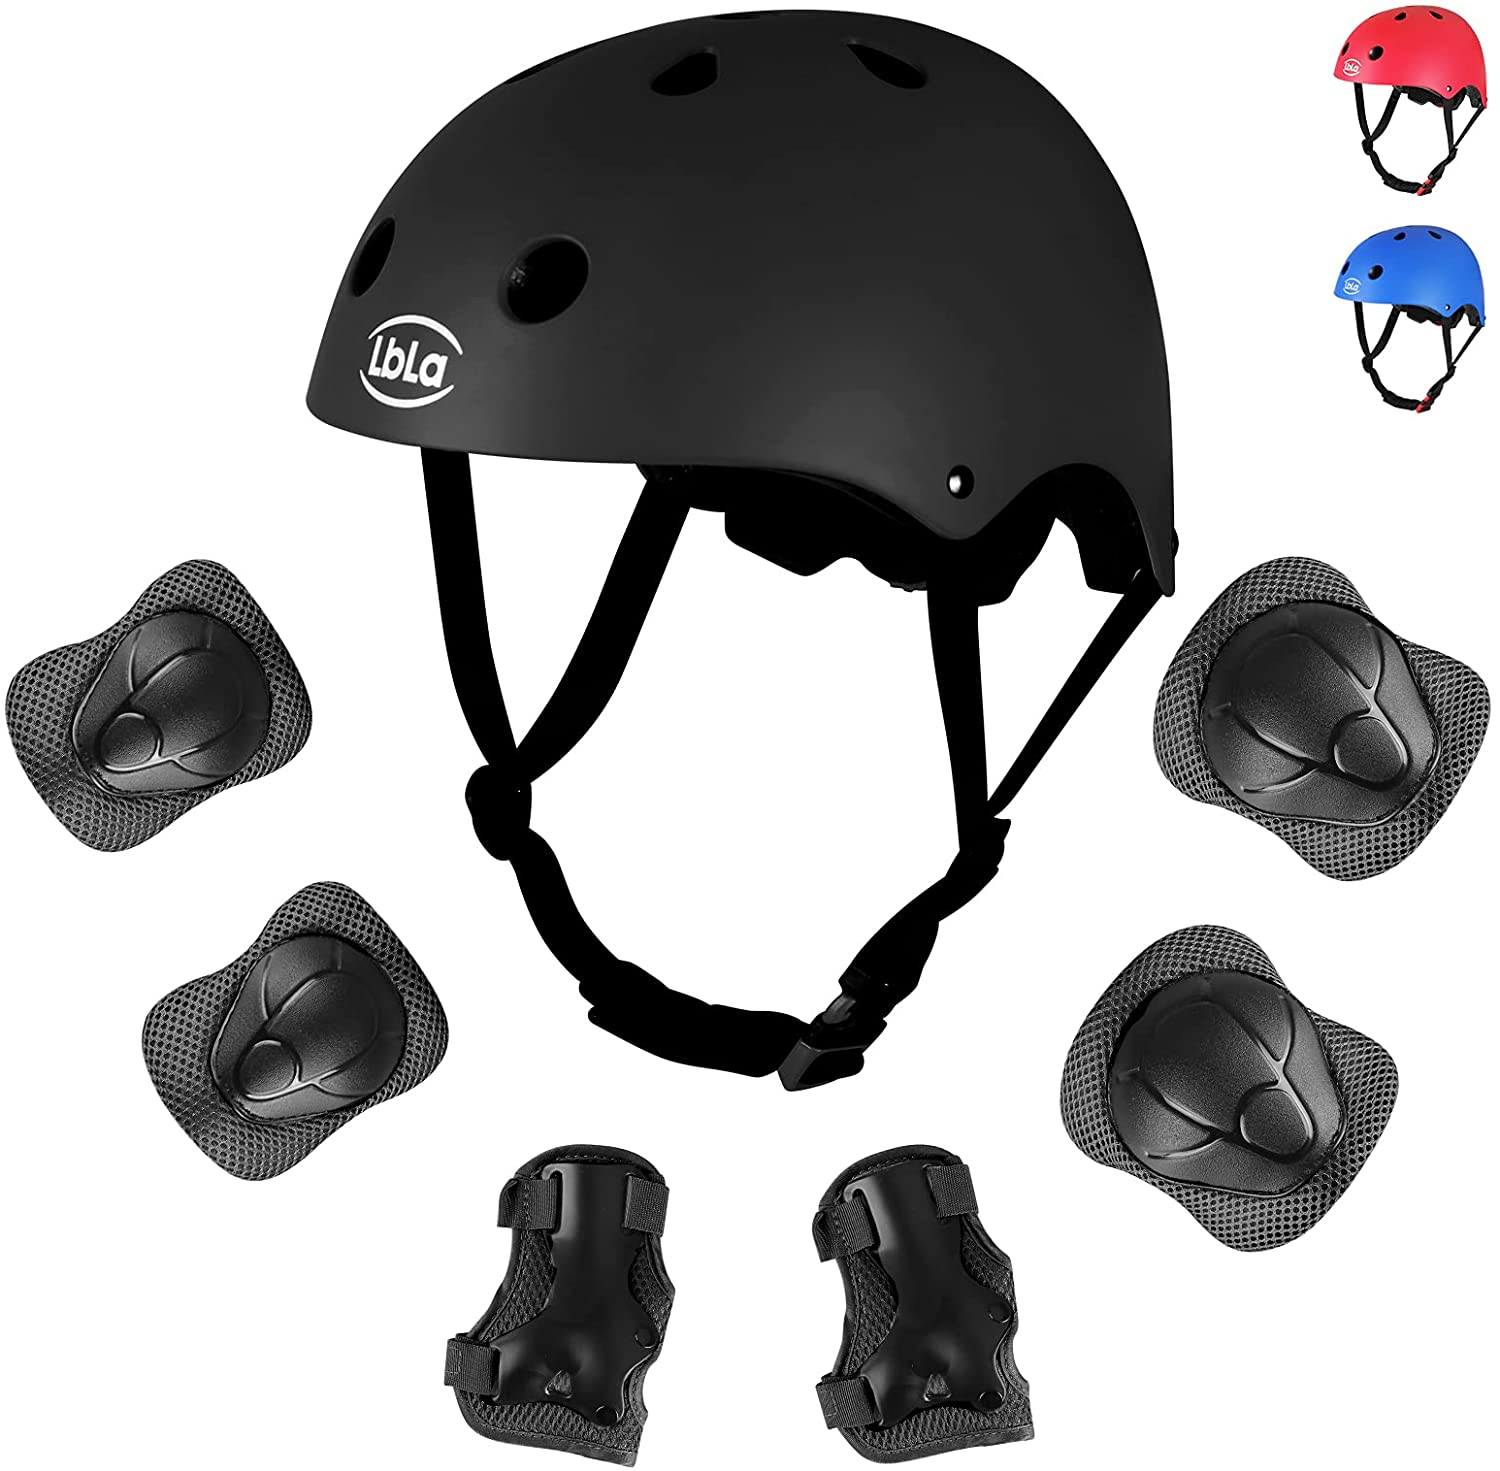 New Delivery for Kids Scooter 5 - LBLA Kids Bike Skateboard Helmet,Helmet and Pads Protect Head Knee Elbow and Wrist,7 Pcs Adjustable Protective Gear Set for 3-8 Years Kids Boys and Girls – ...